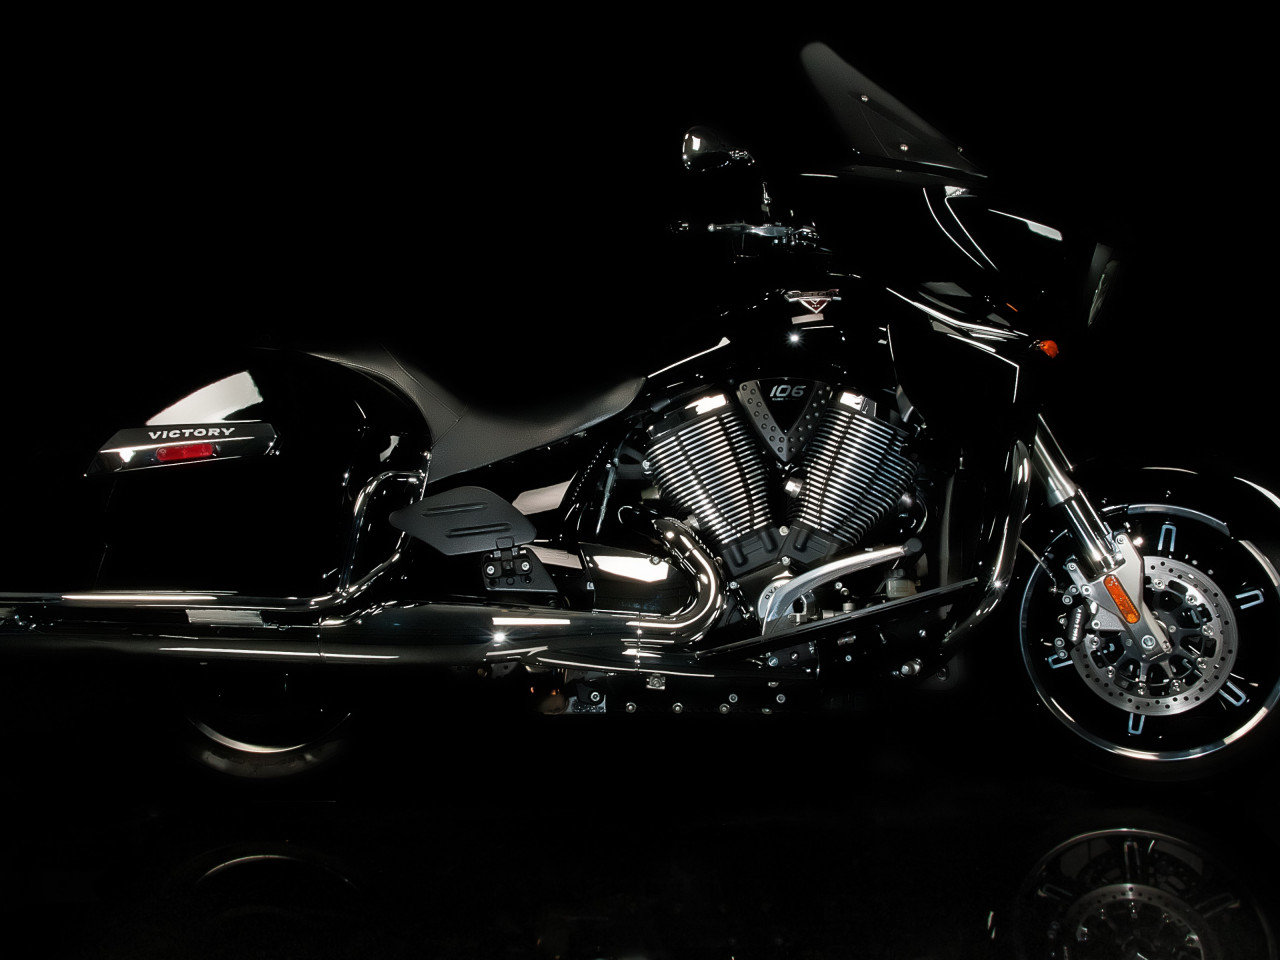 Victory motorcycle wallpaper 1280x960